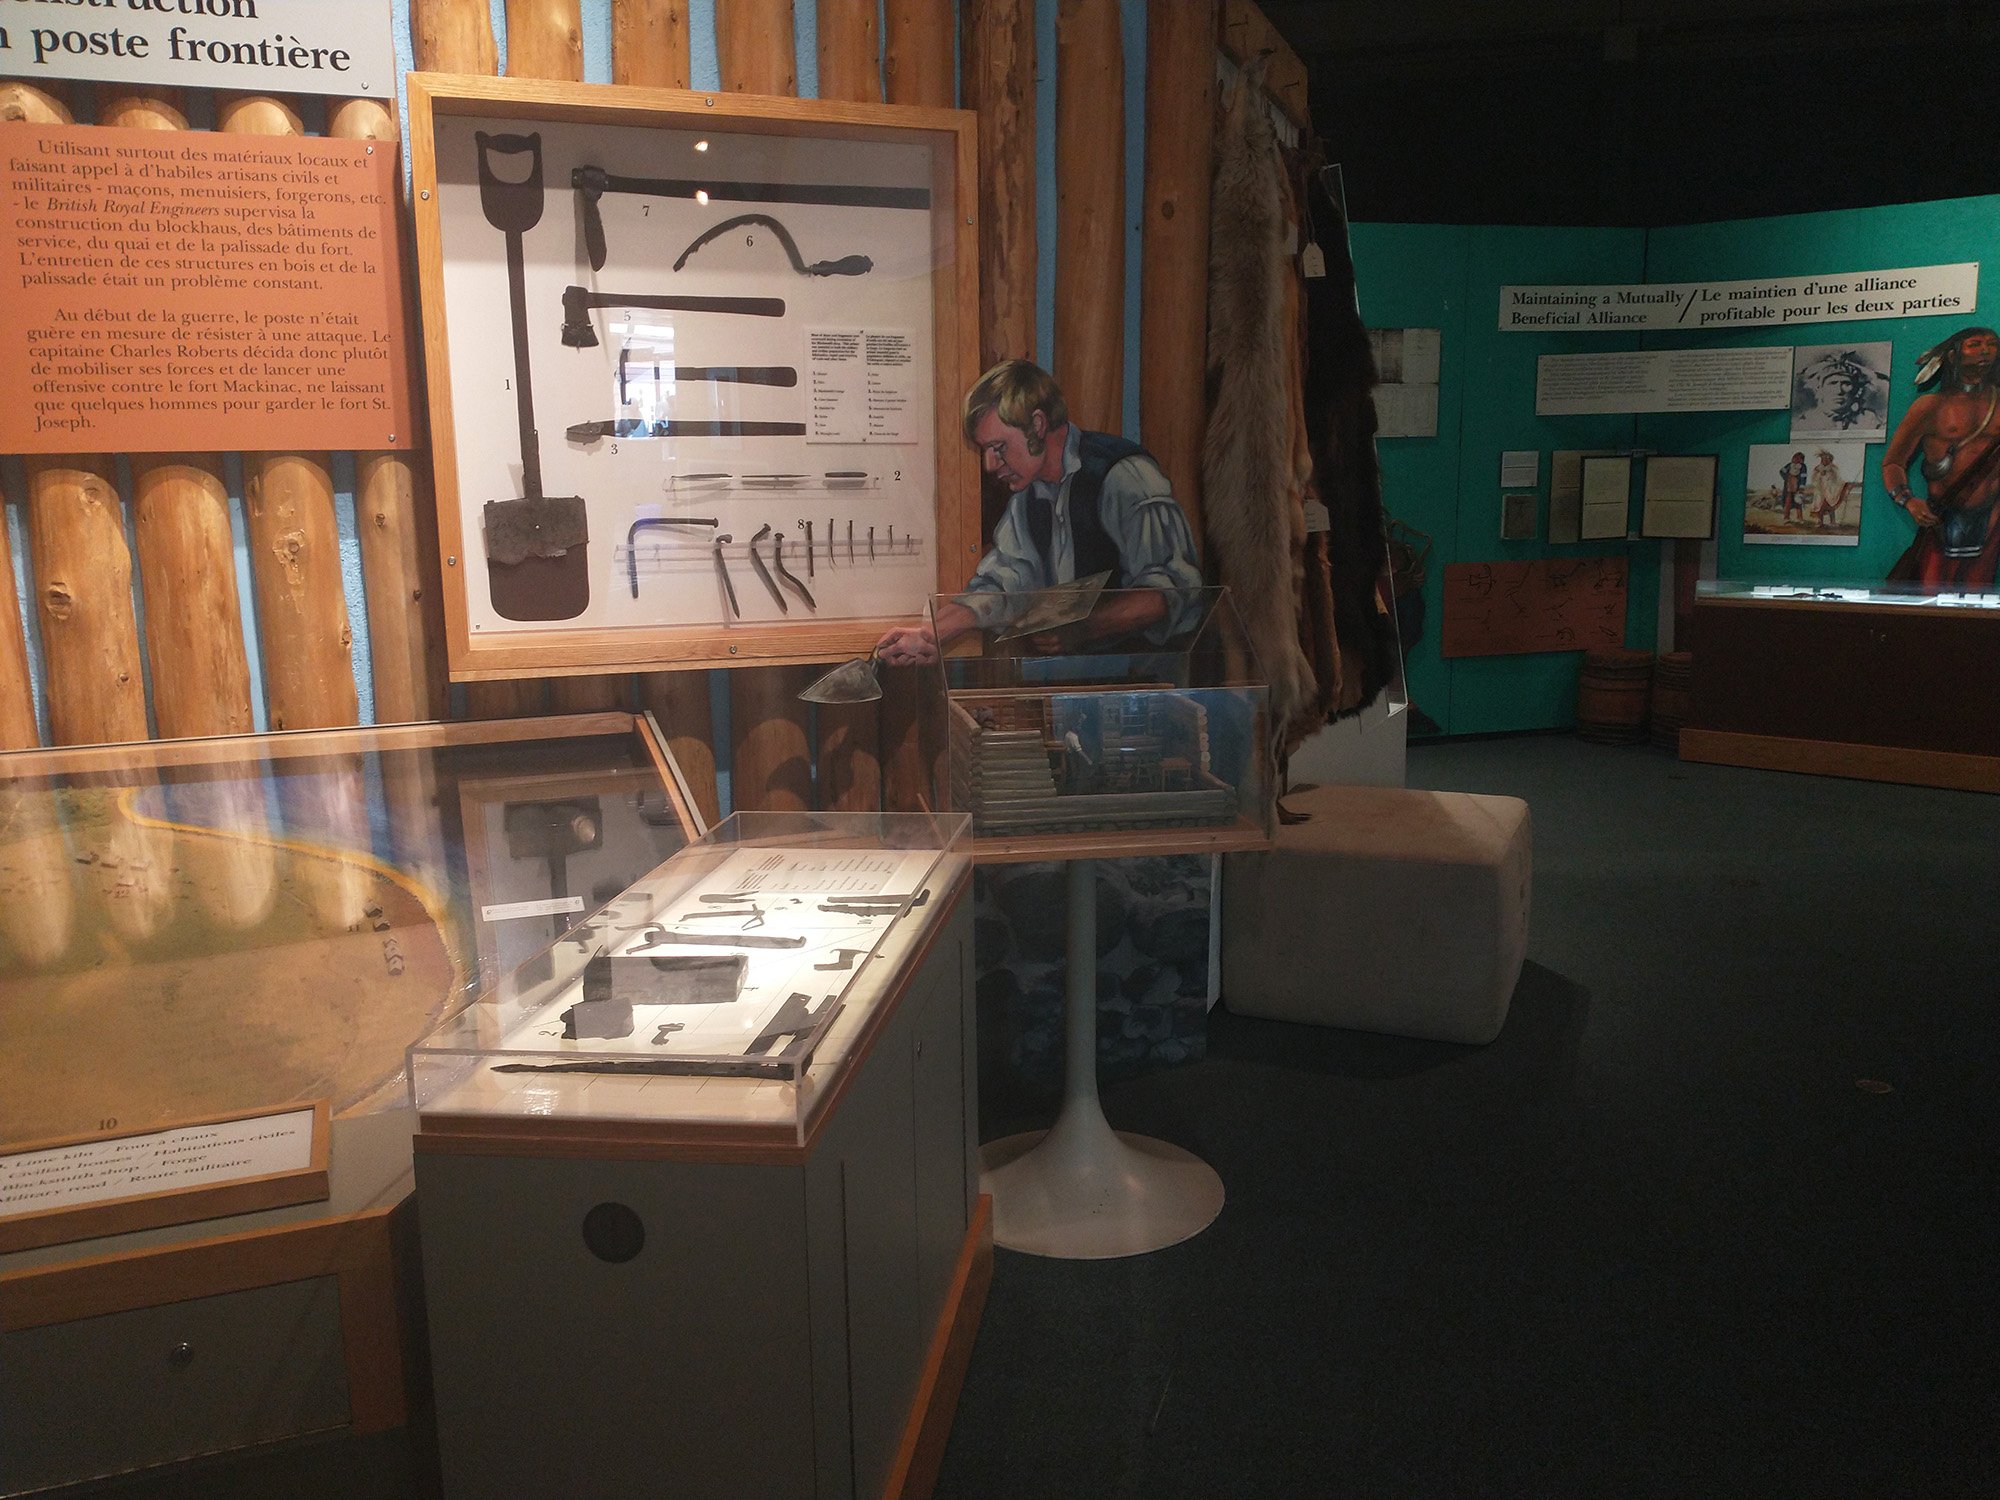 There's a little museum about life in the fur trade days